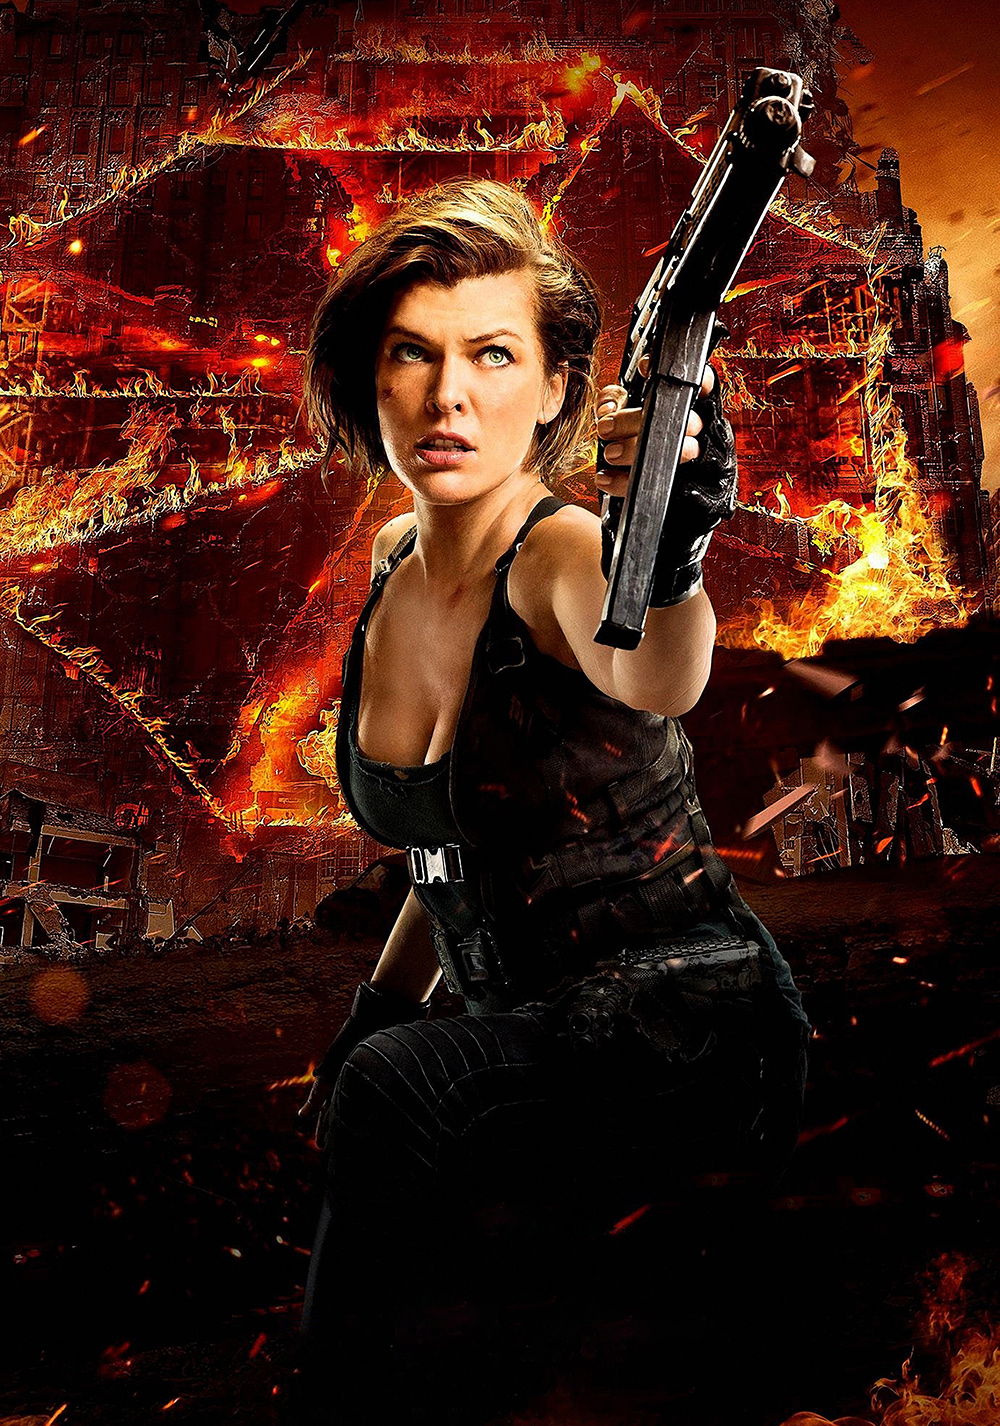 resident evil final chapter subtitle yify